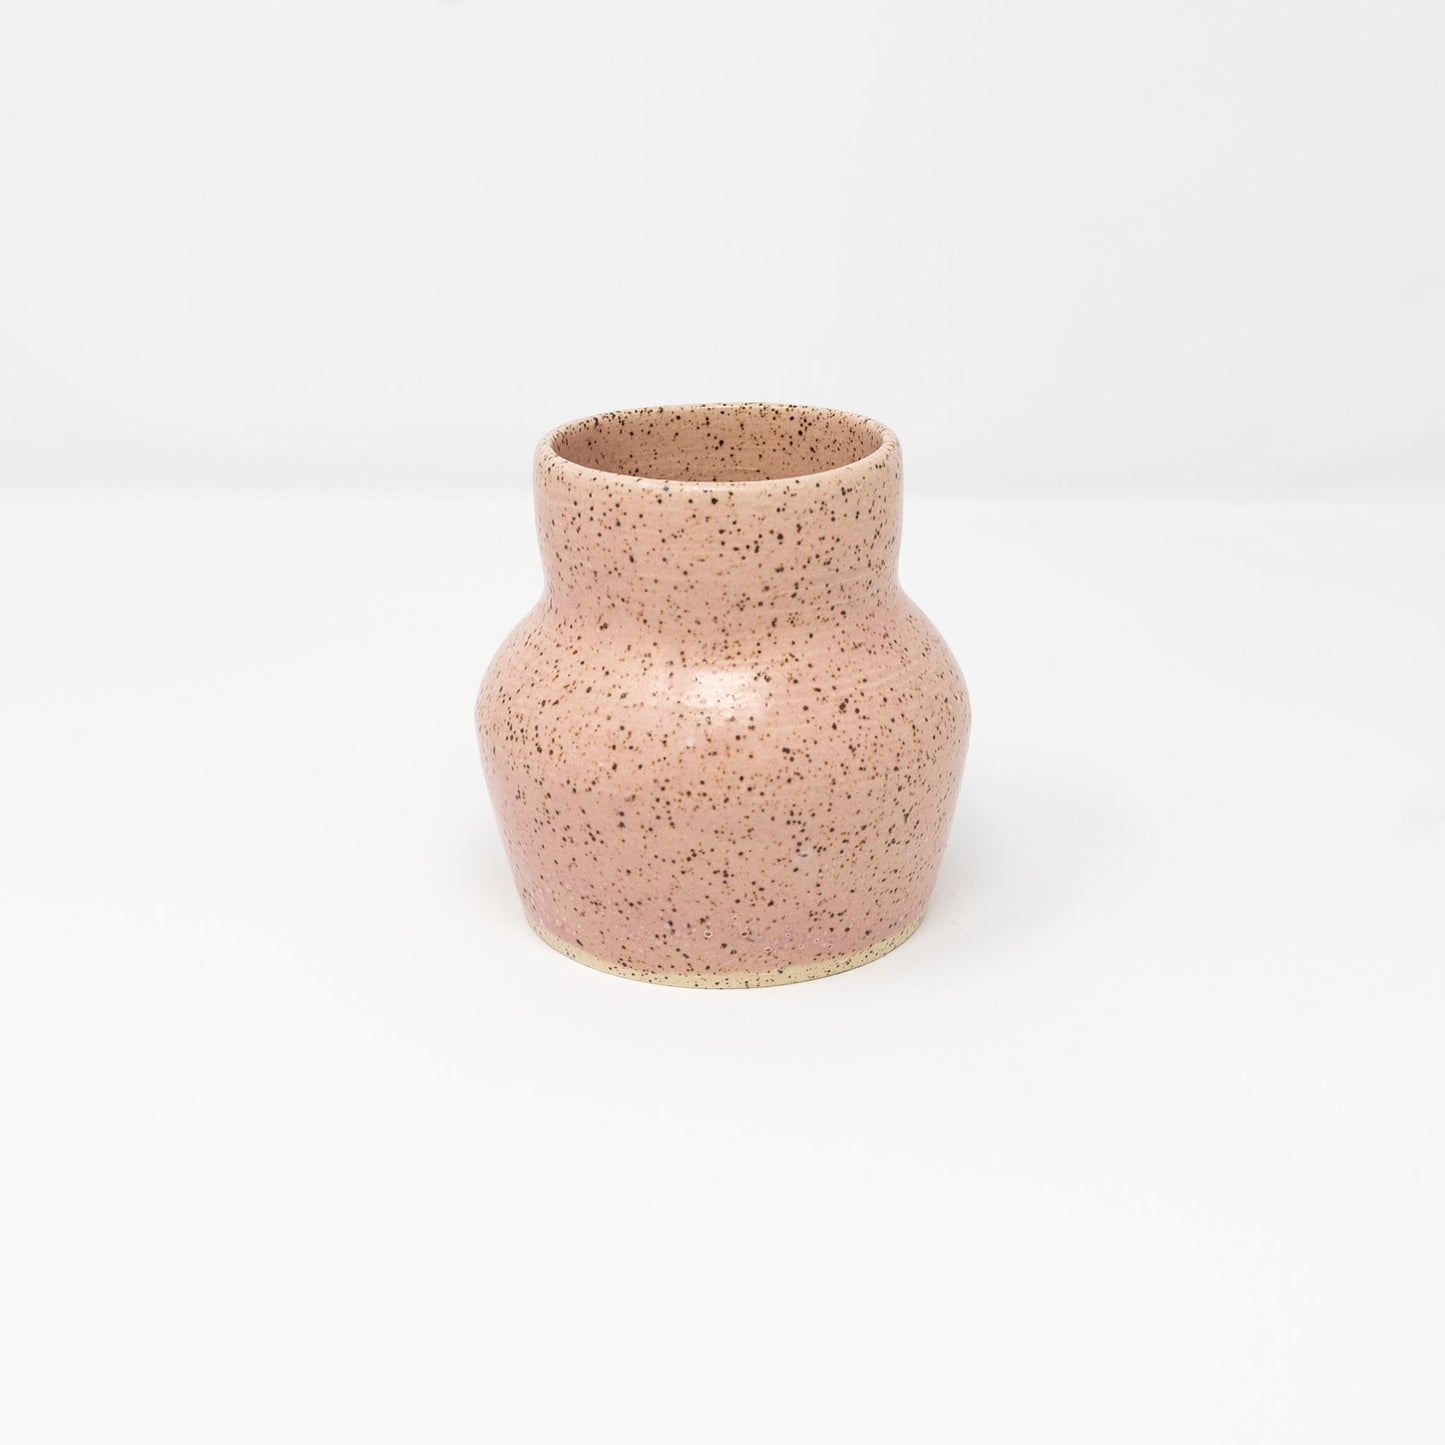 Small vases